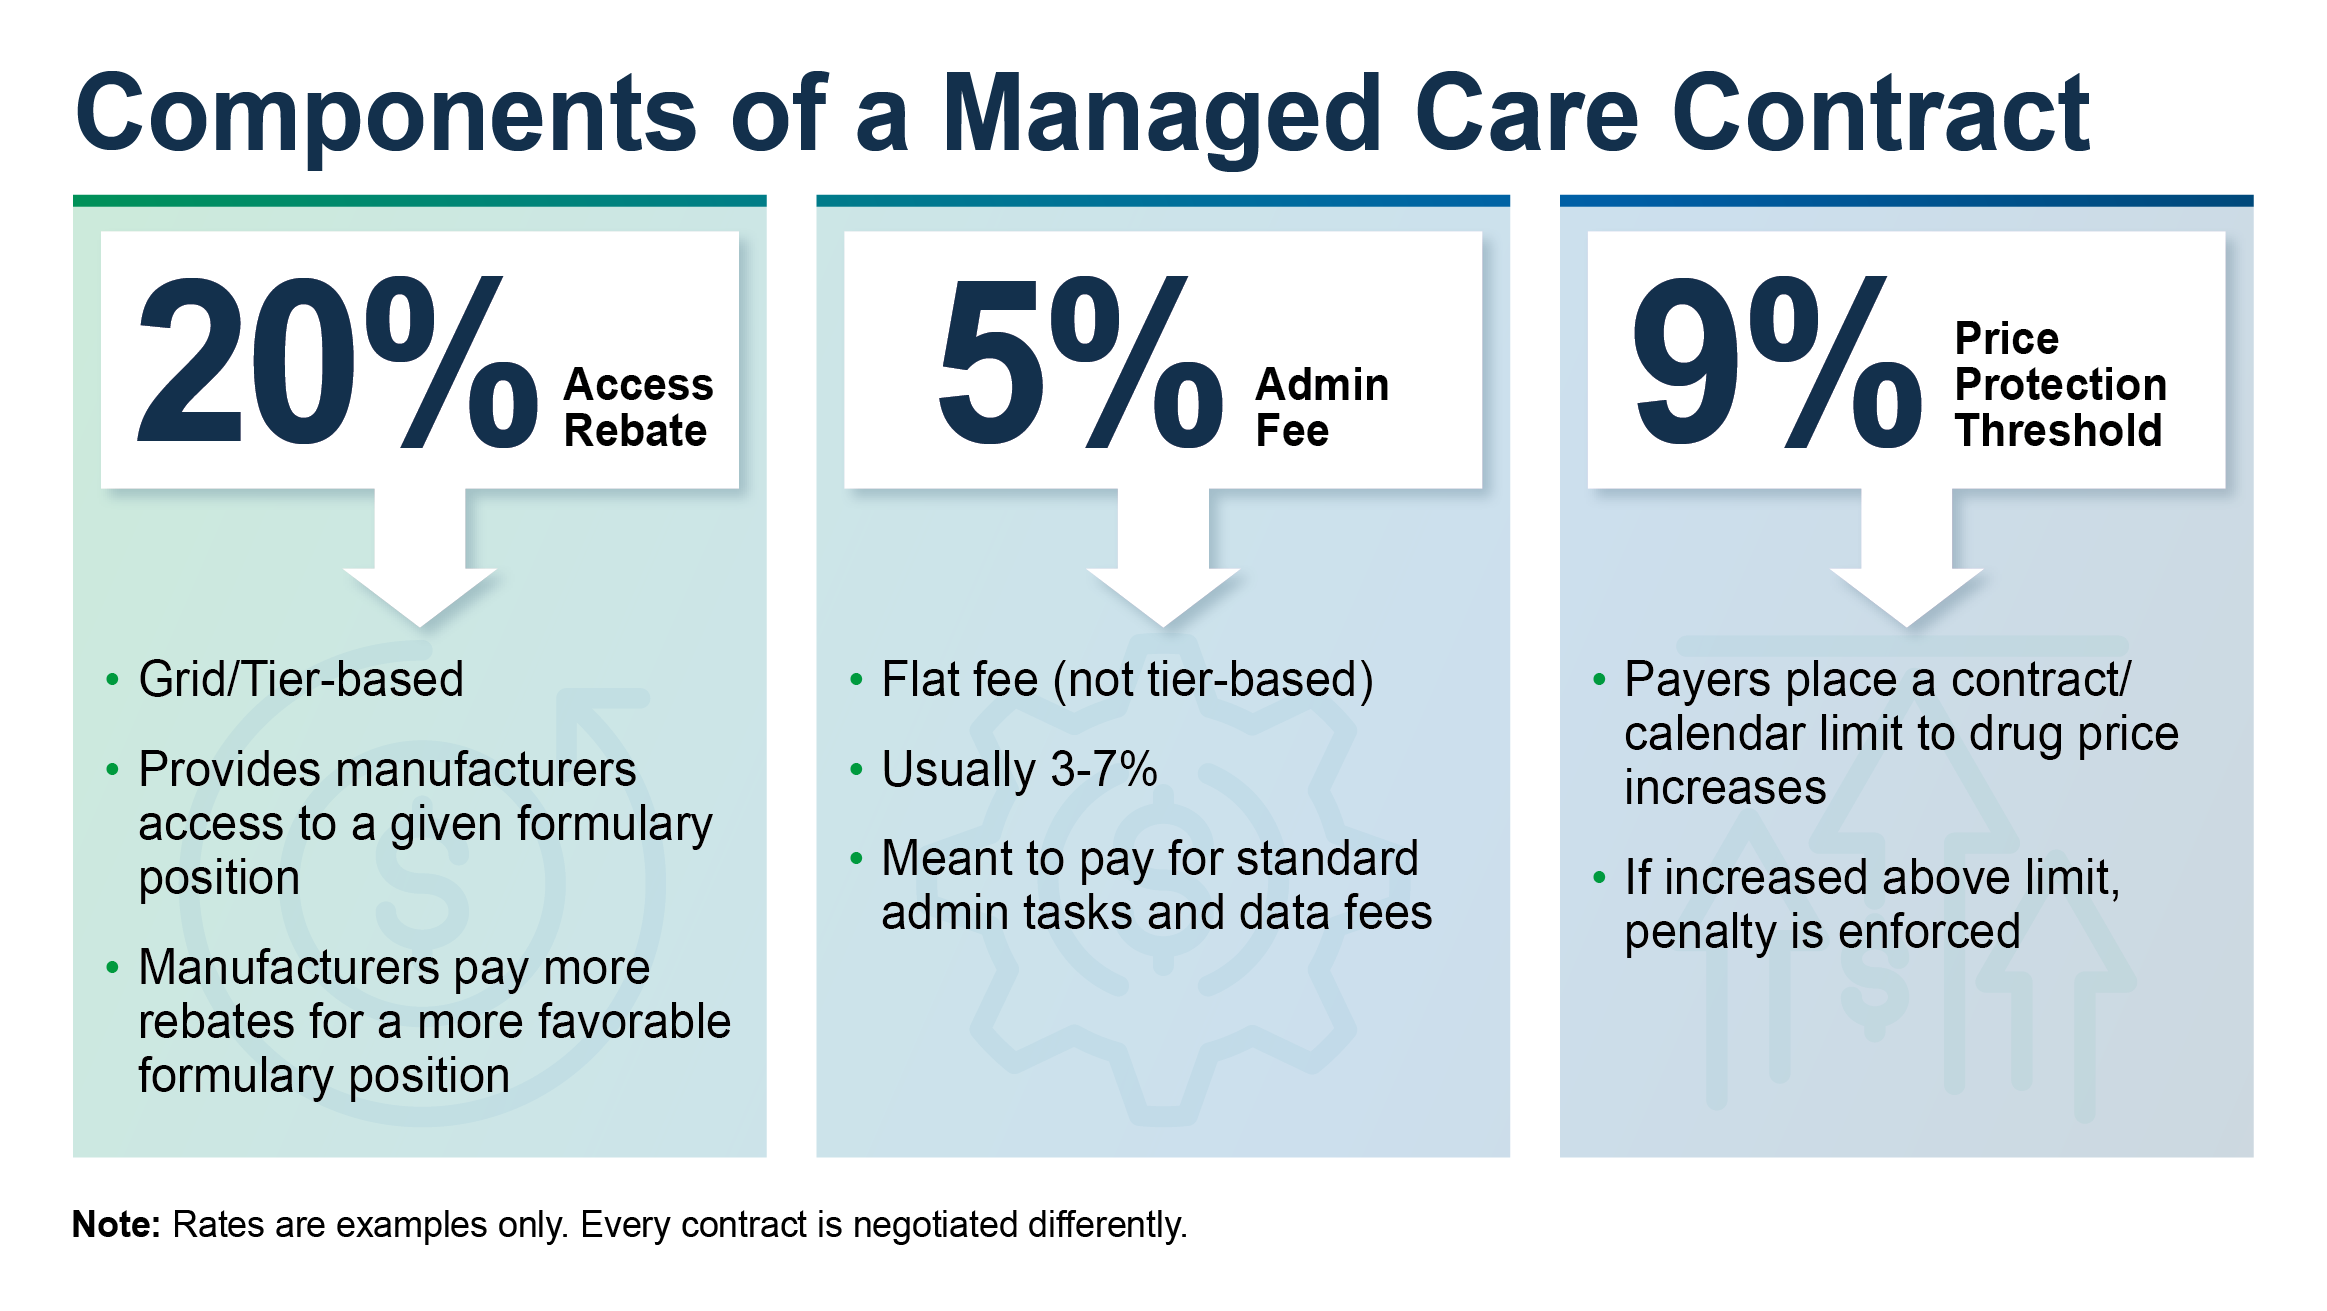 Icyte Gtn Price Protection Scenario Overview Graphic: Access rebate, admin fee, and price protection threshold components of a managed care contract and their percentages